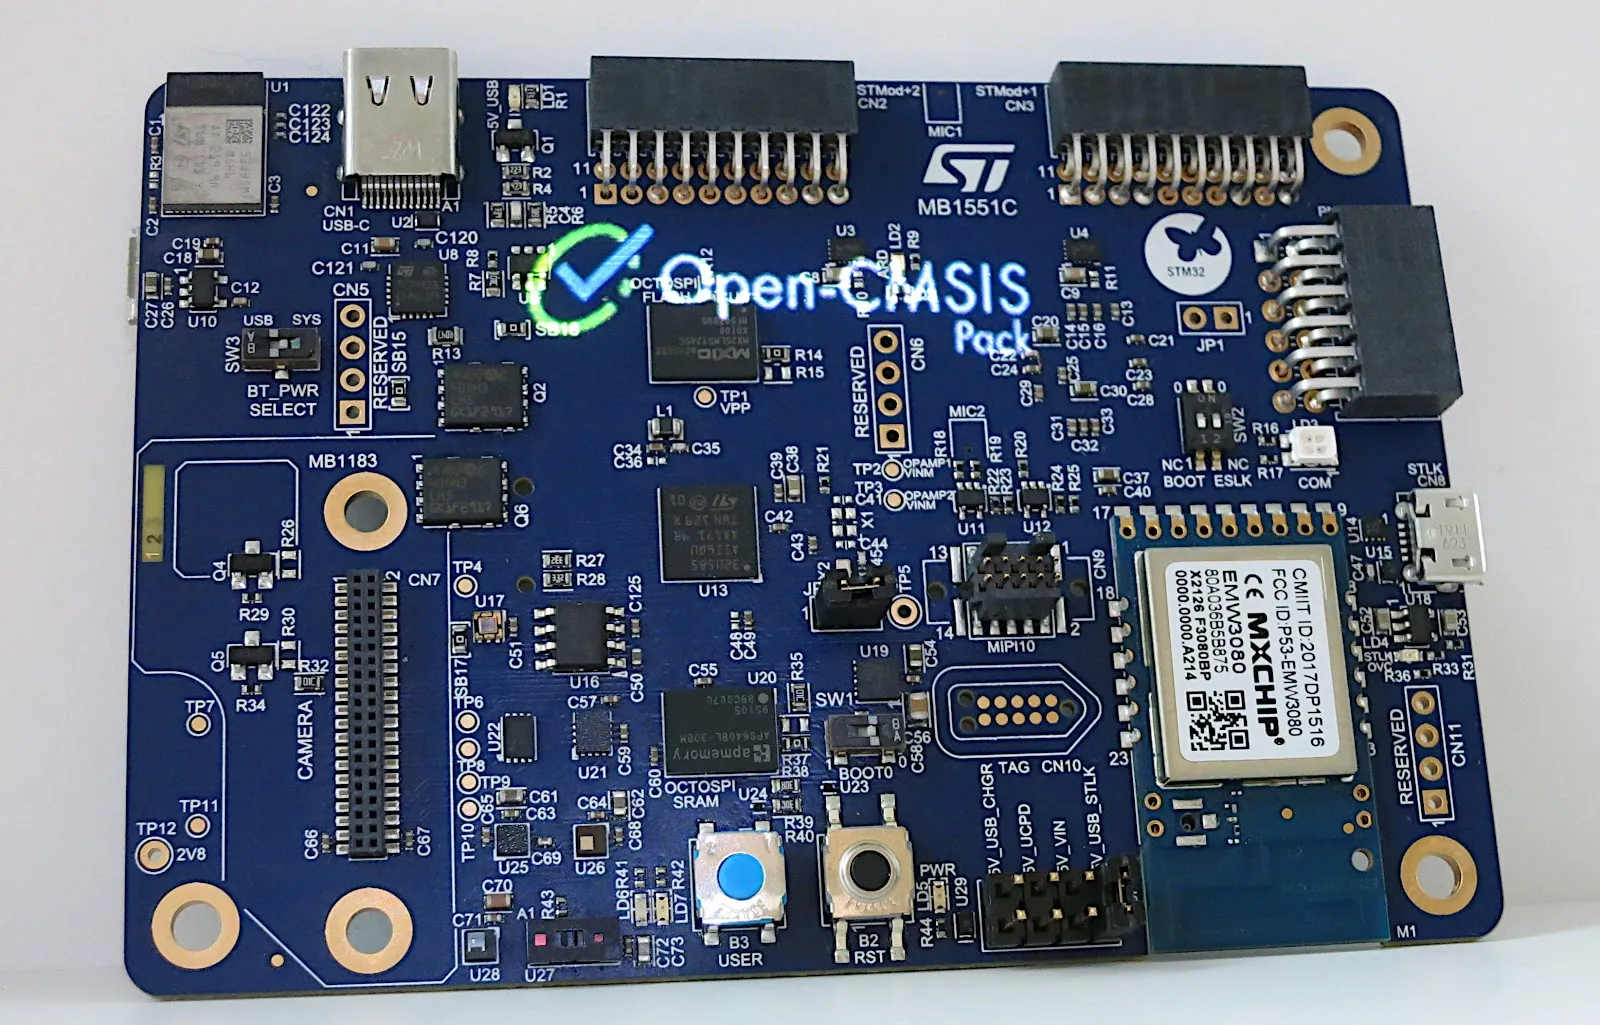 Picture of an STM32 development board supported by STMicroelectronics tools that leverage Open CMSIS Pack